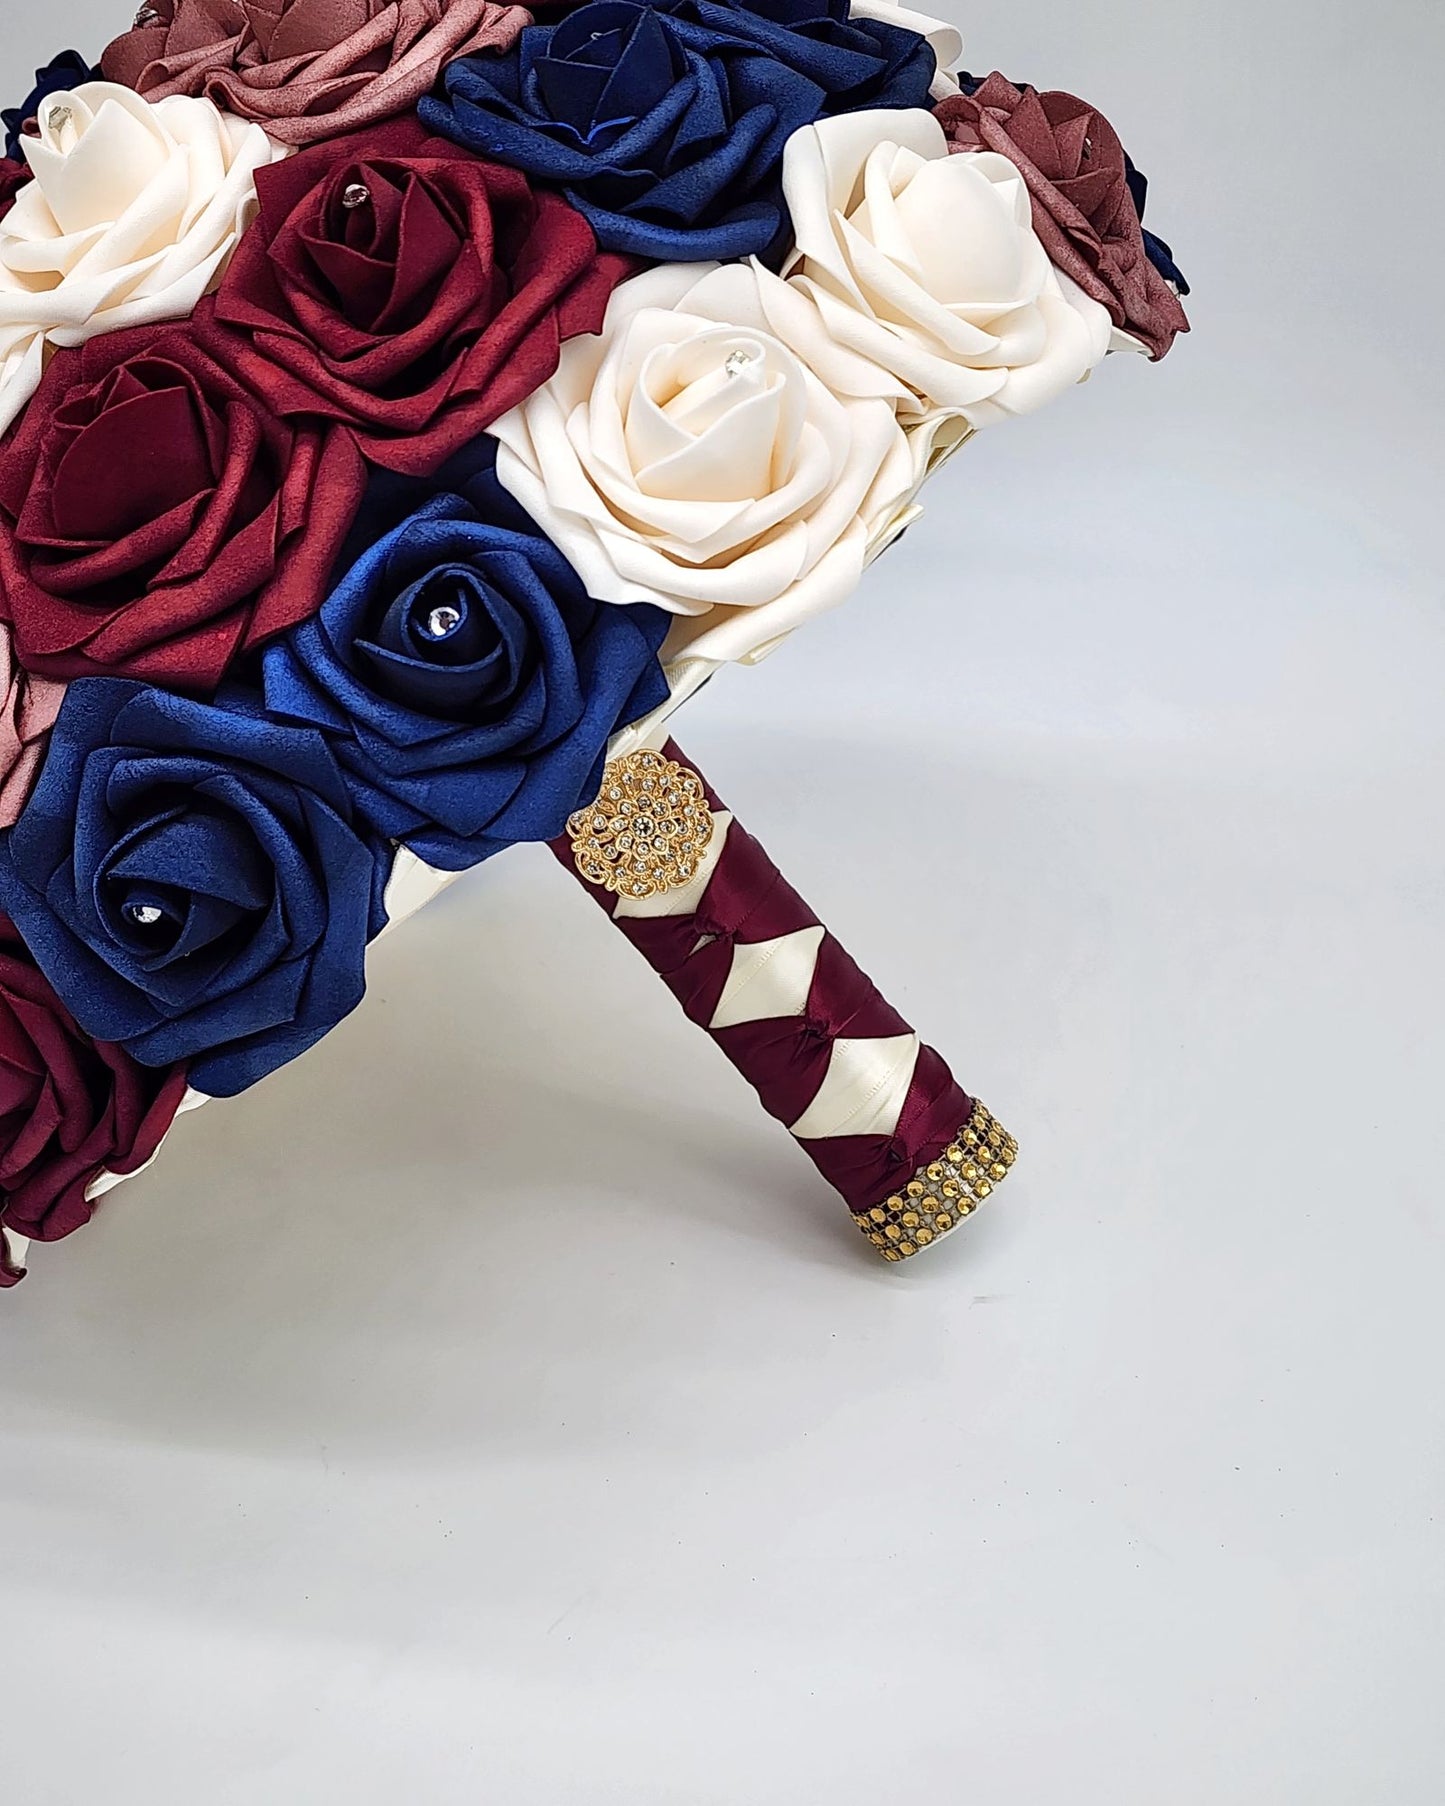 Burgundy, Navy, Dusty Rose, and Cream Bridal Bouquet